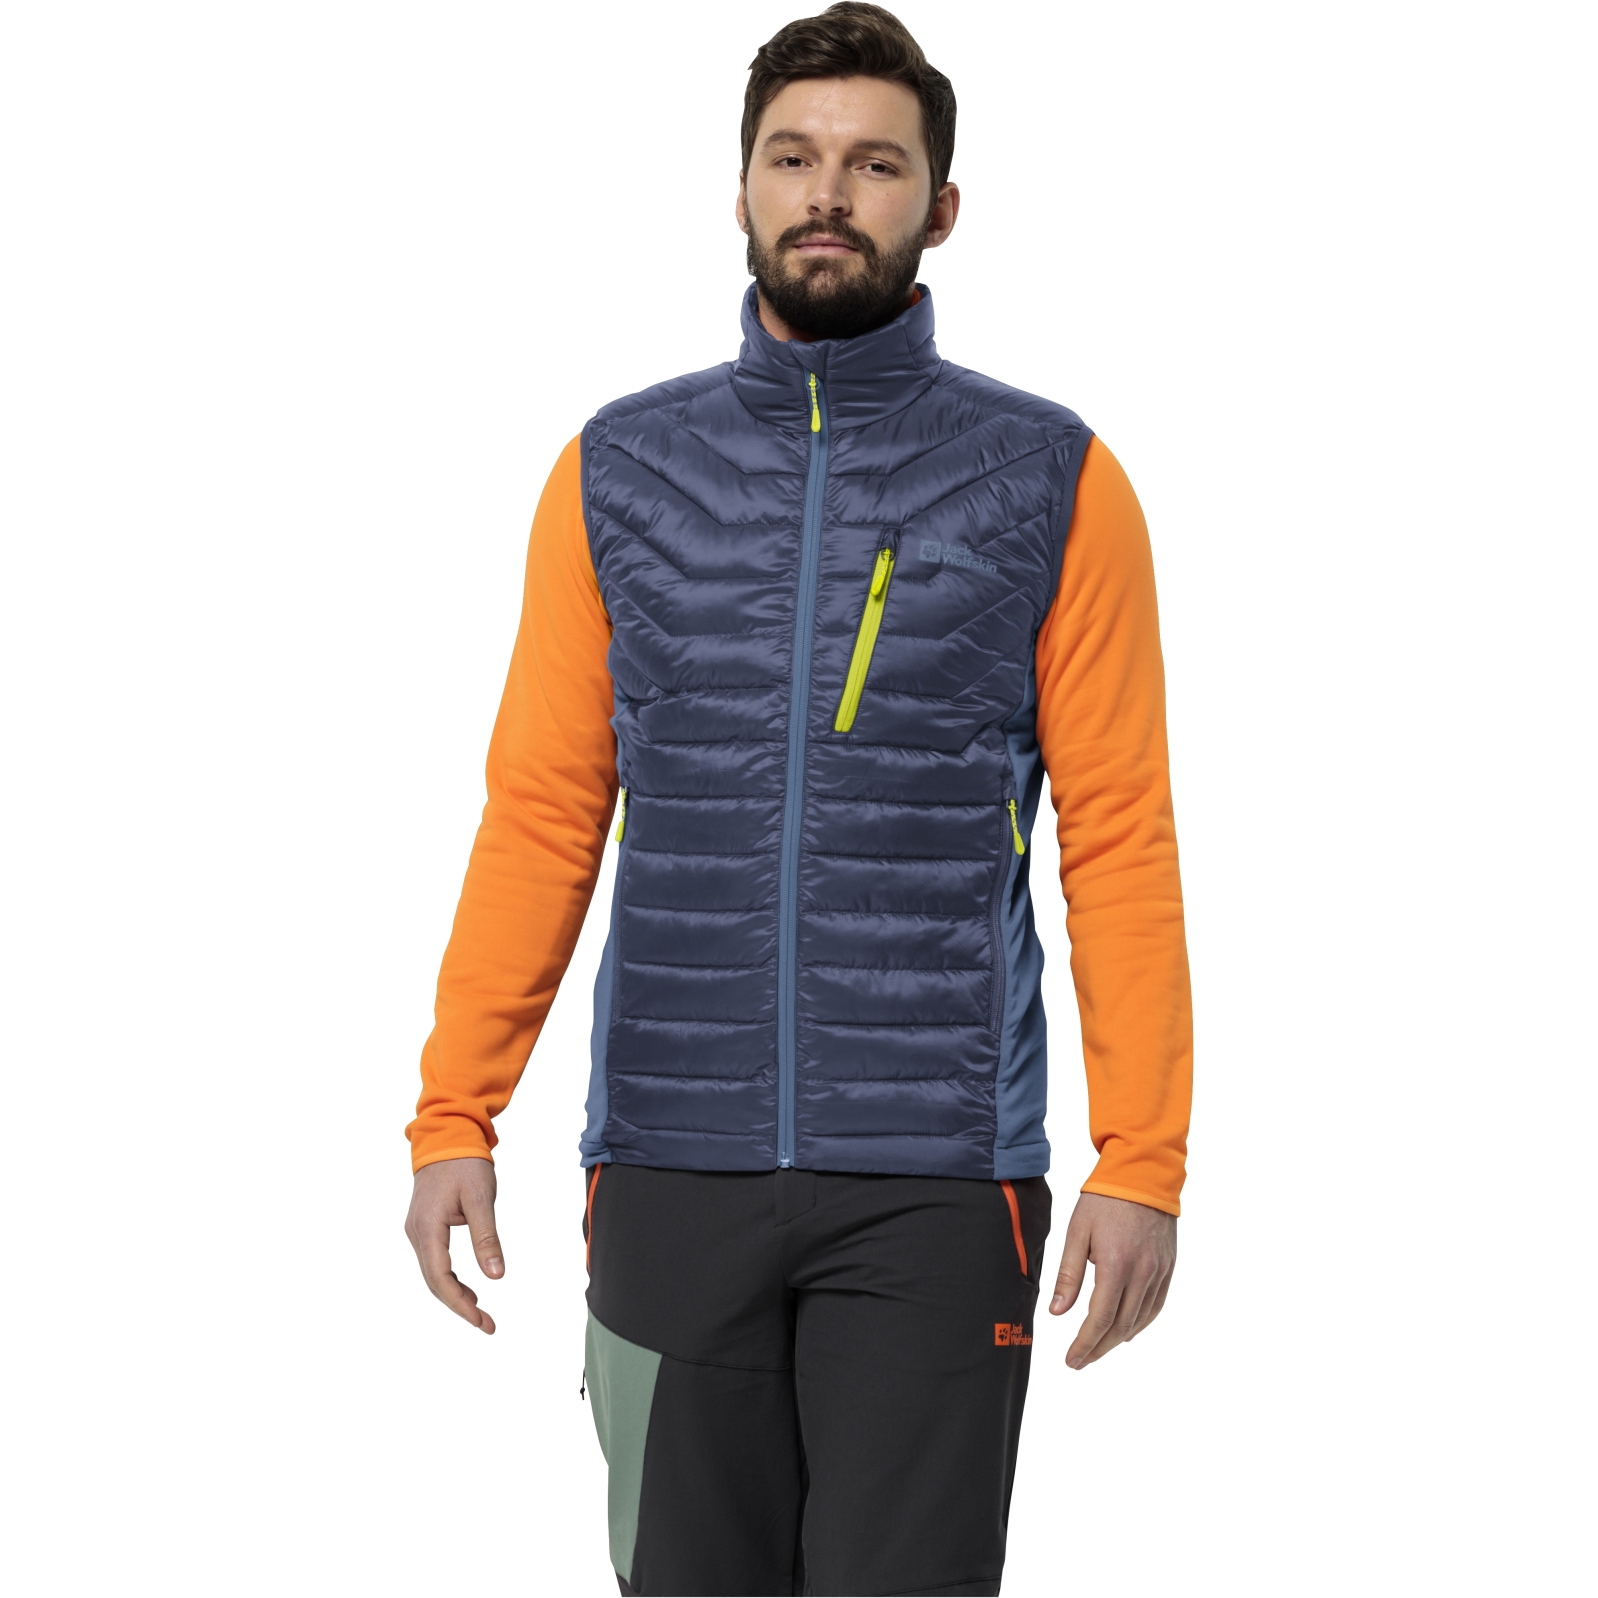 Picture of Jack Wolfskin Routeburn Pro Insulated Vest Men - evening sky